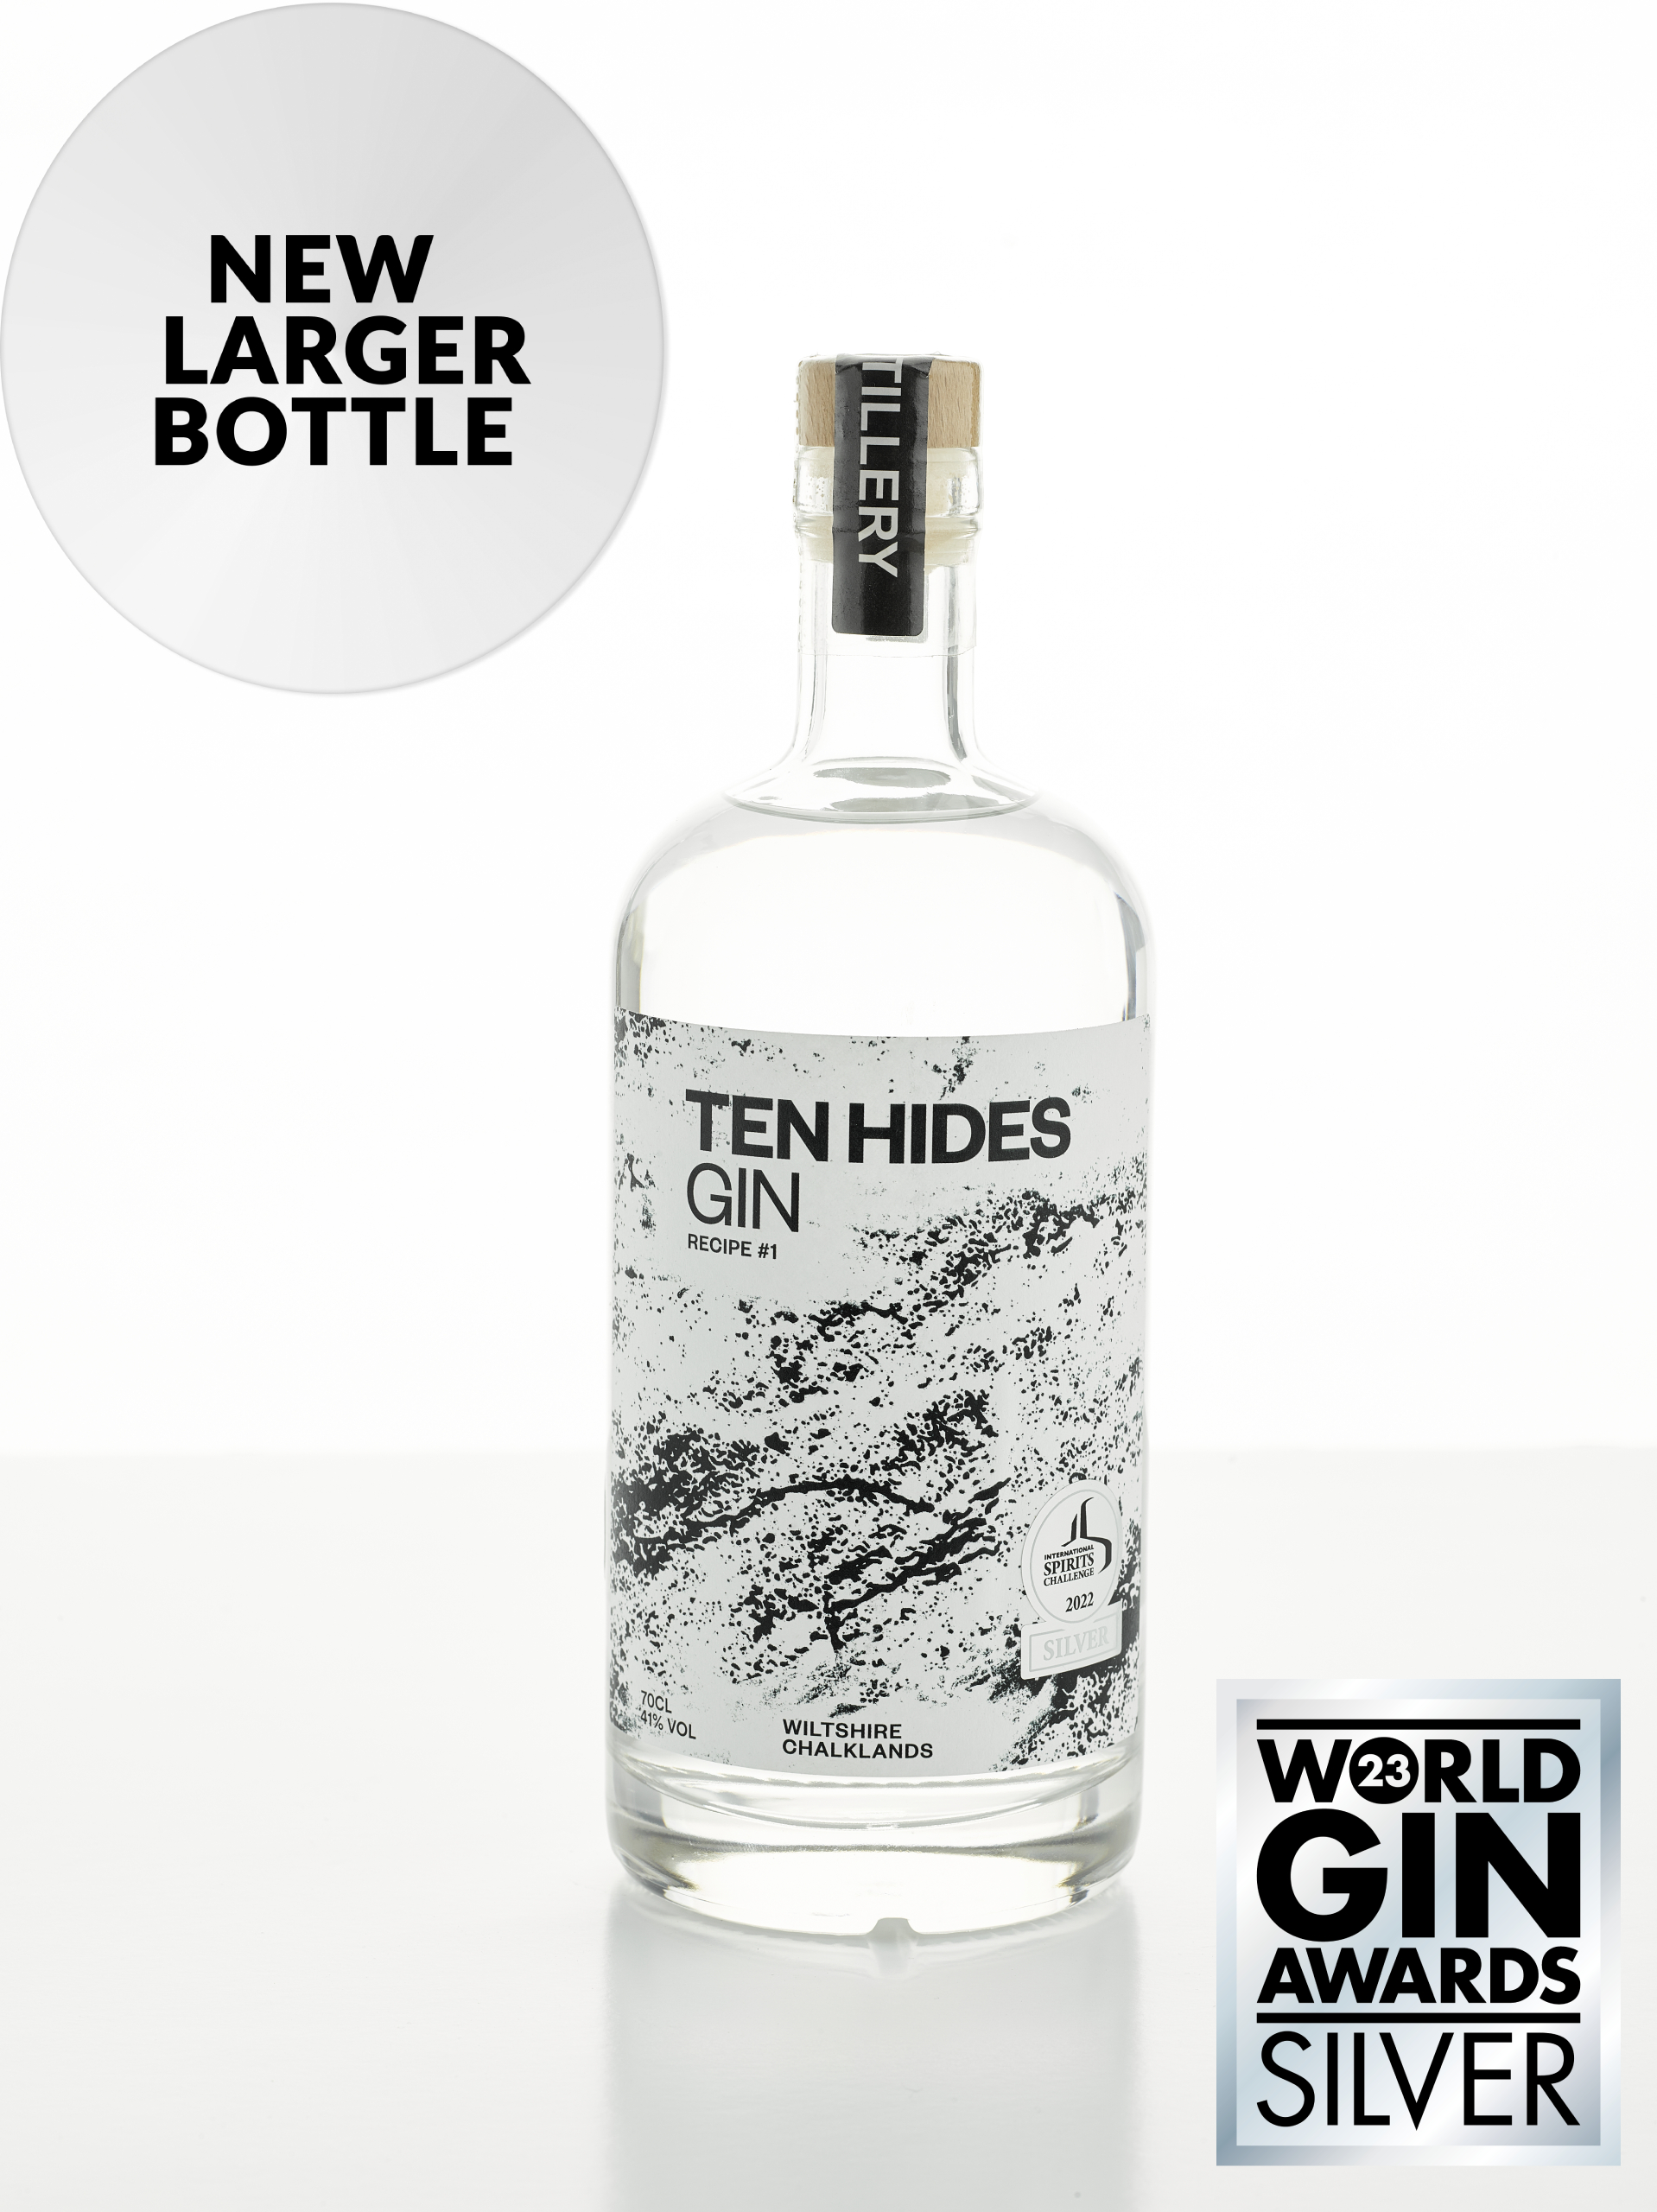 Ten Hides Gin 70cl bottle image with World Gin Award label